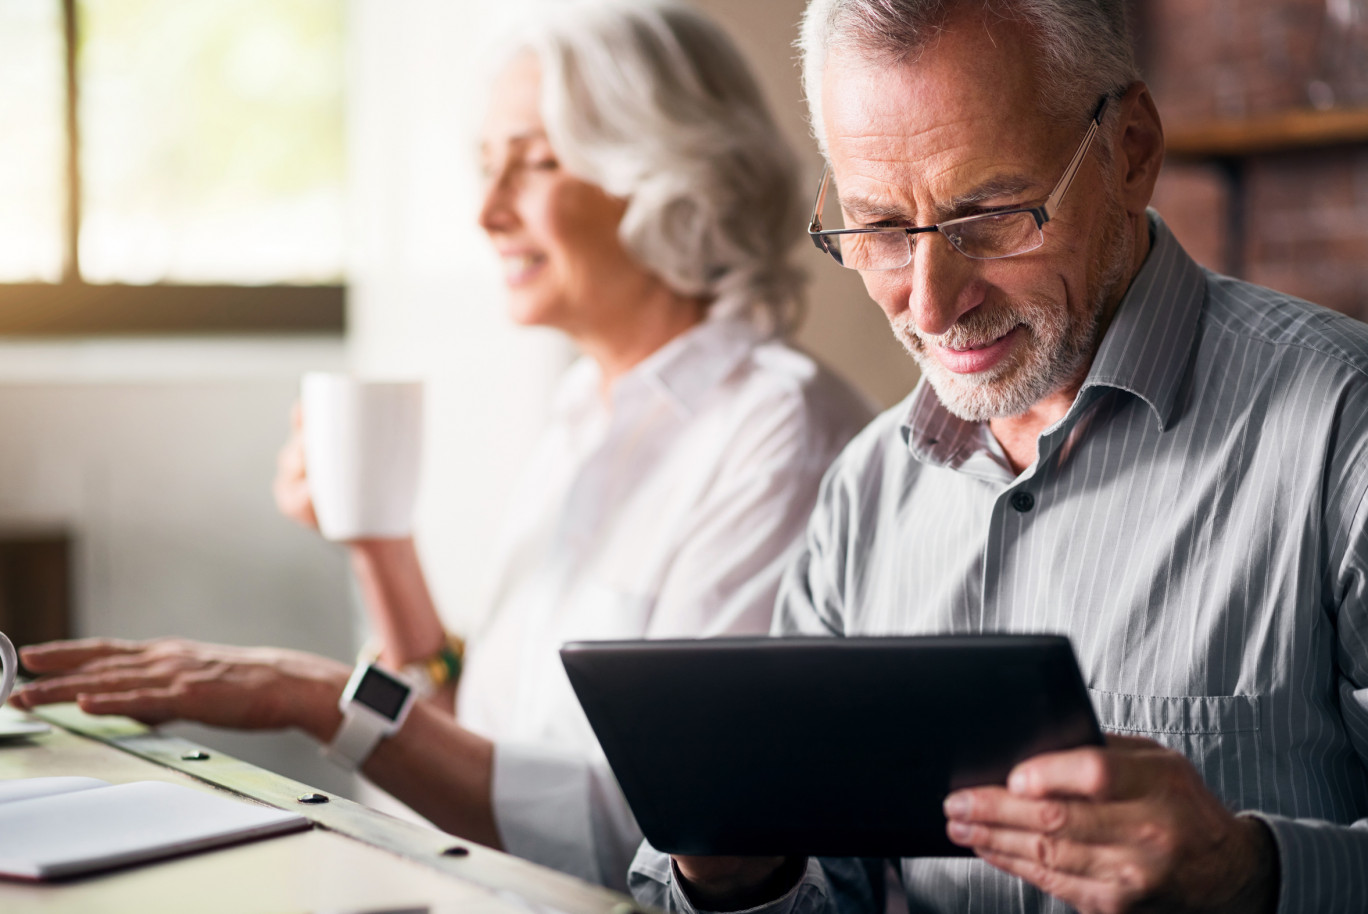 Daily life. Old grey man in glasses using laptop while woman drinking tea and smiling